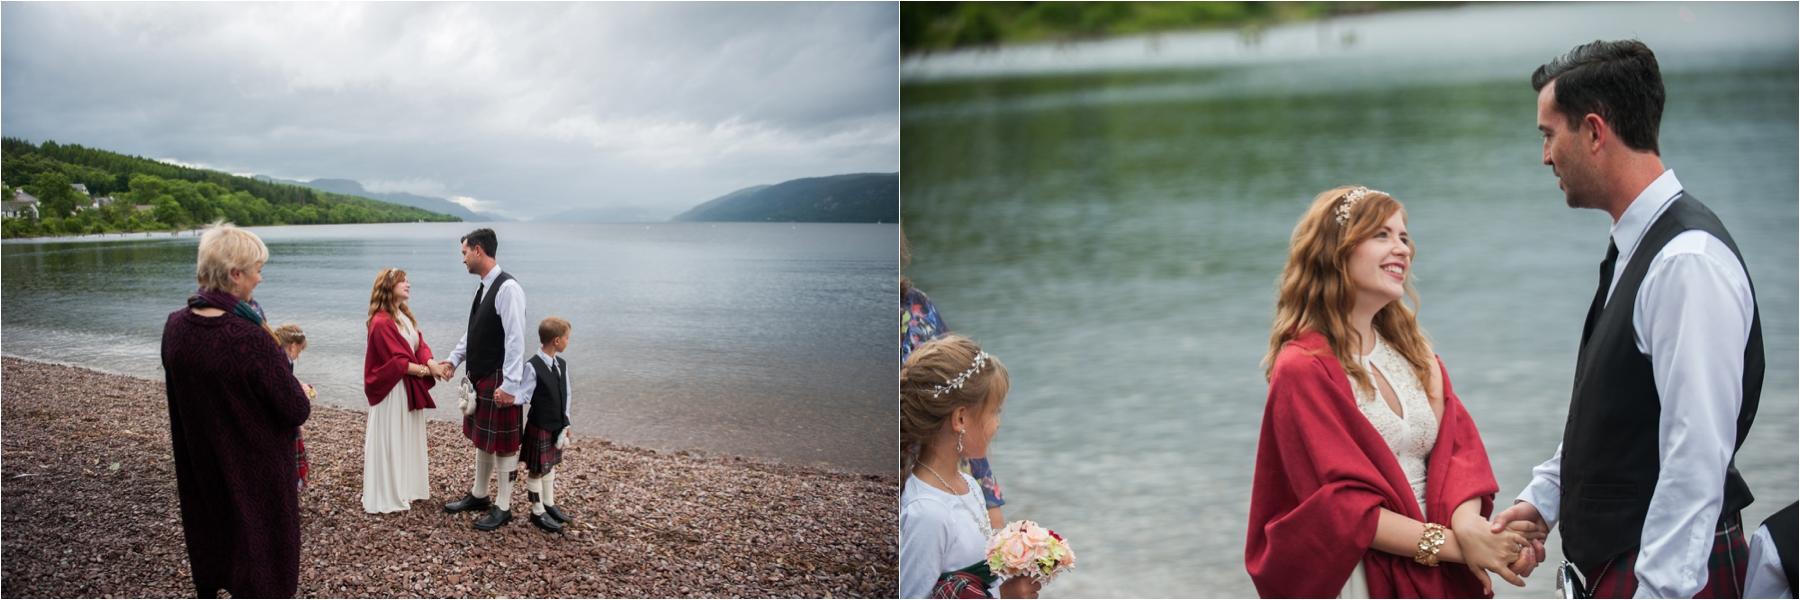 elopement wedding Scotland on the banks of Loch Ness